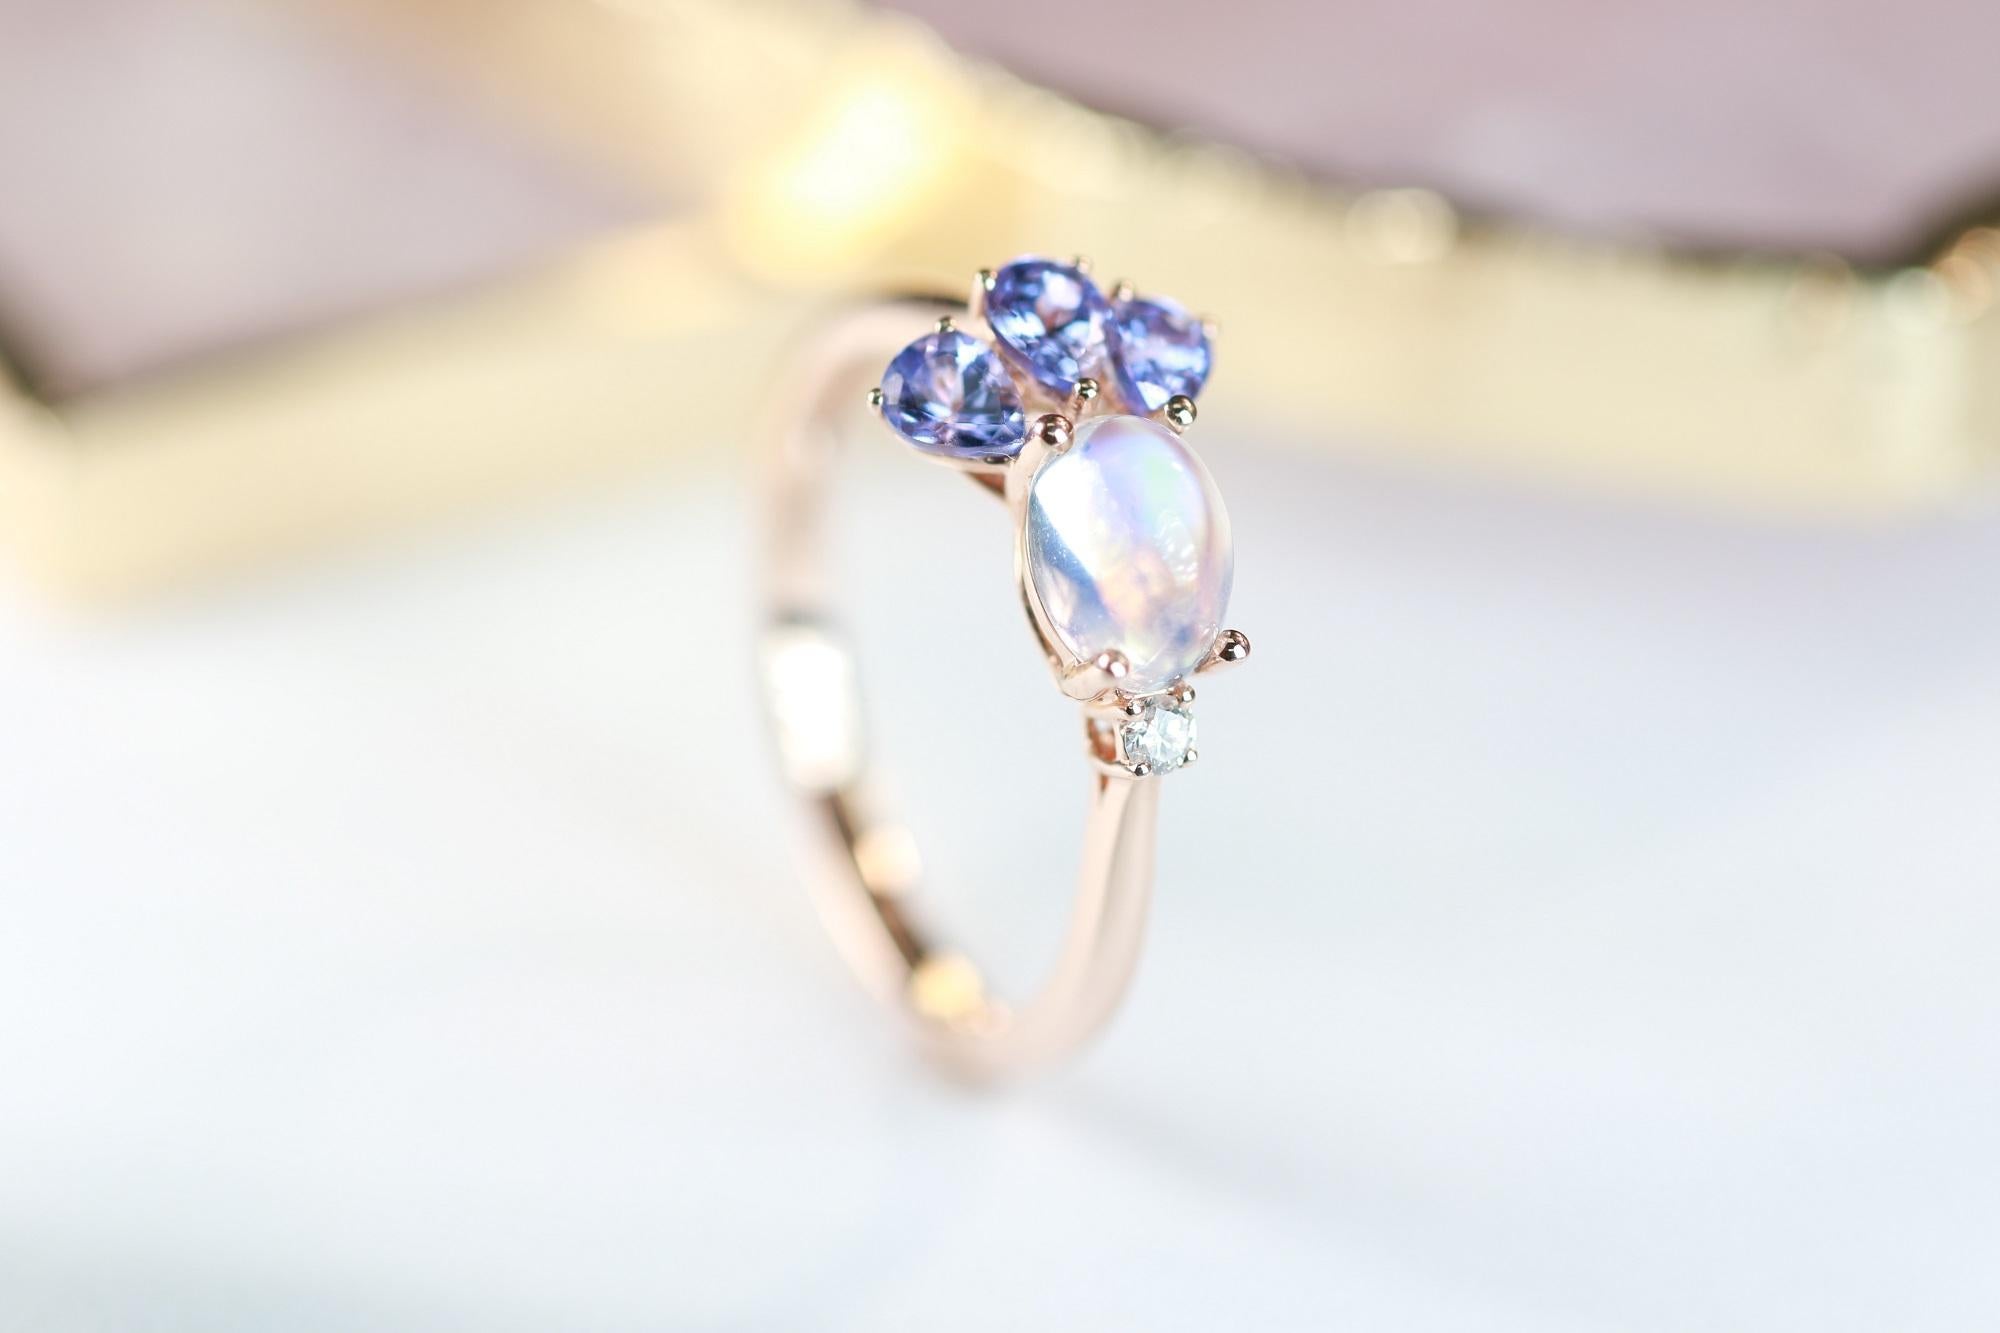 Stunning, timeless and classy eternity Unique Ring. Decorate yourself in luxury with this Gin & Grace Ring. The 14k Rose Gold jewelry boasts Oval Cab Prong Setting Genuine moonstone  (1 pcs) 0.57 Carat, Pear cut Tanzanite (3 pcs) 0.53 carat along